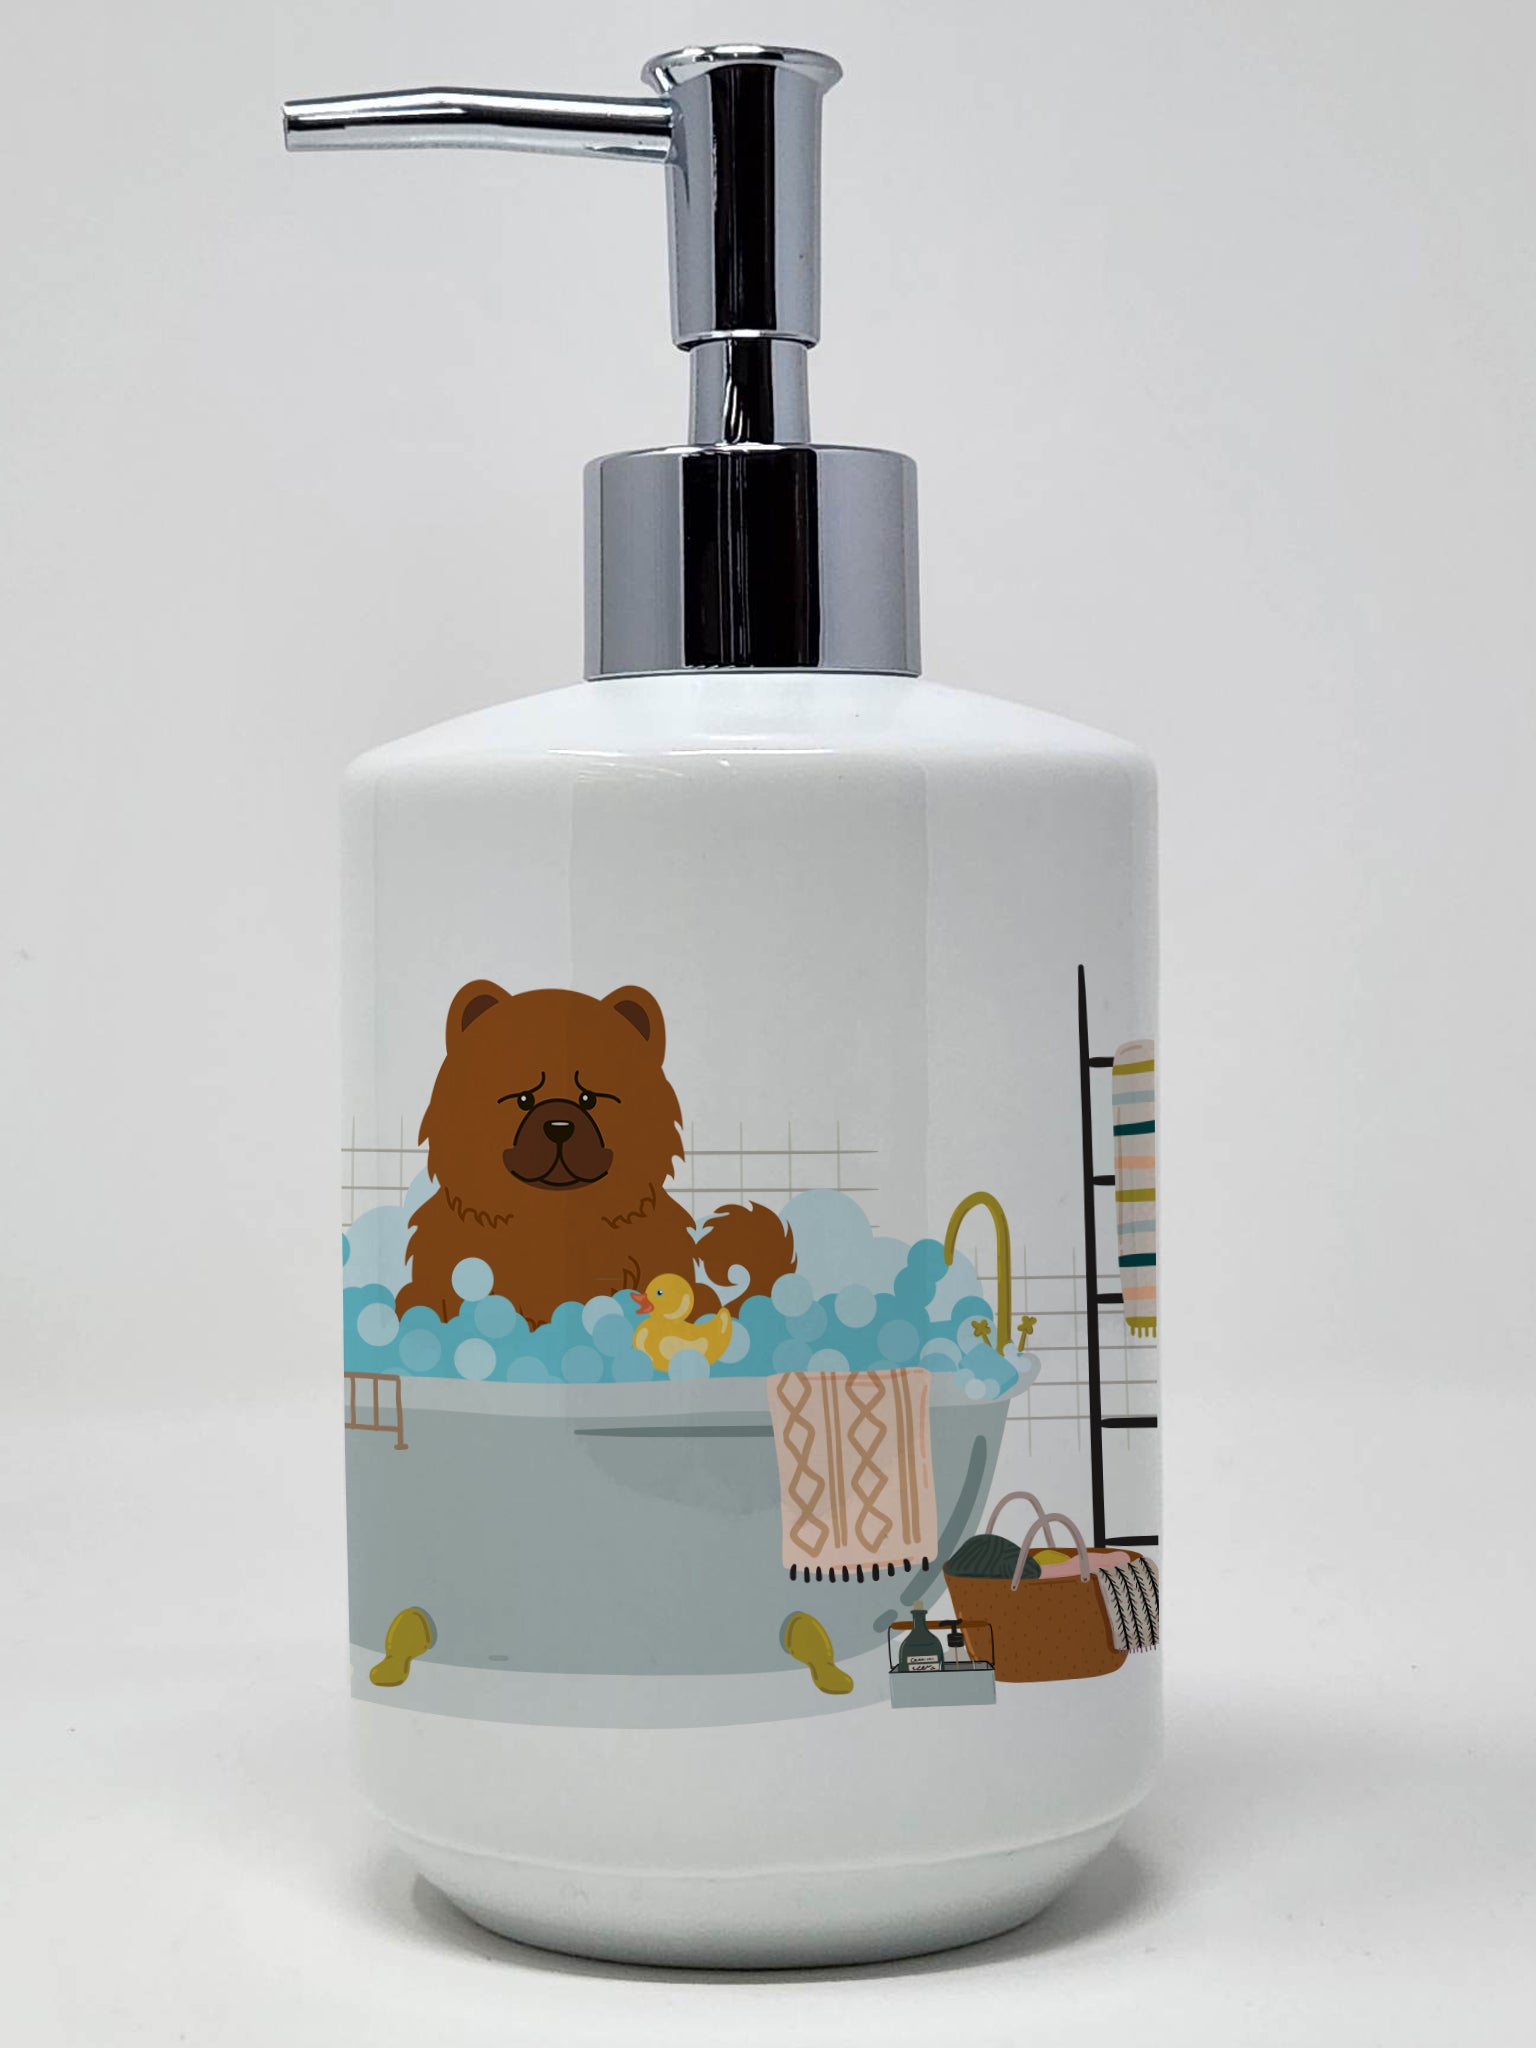 Buy this Red Chow Chow in Bathtub Ceramic Soap Dispenser